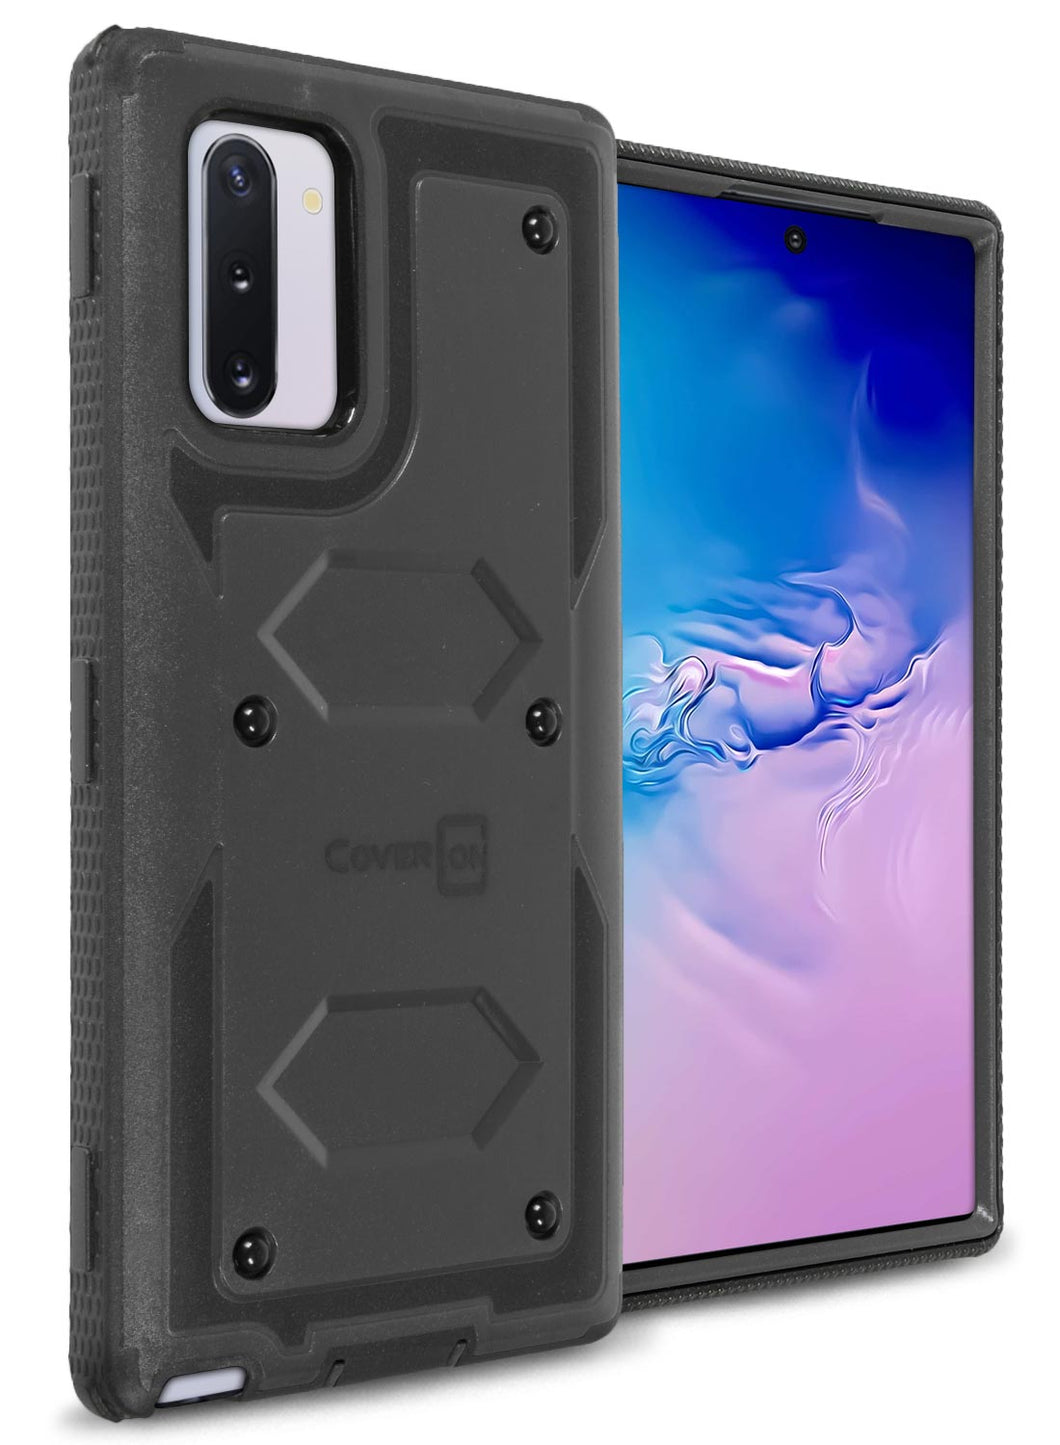 Samsung Galaxy Note 10 Case - Heavy Duty Shockproof Phone Cover - Tank Series